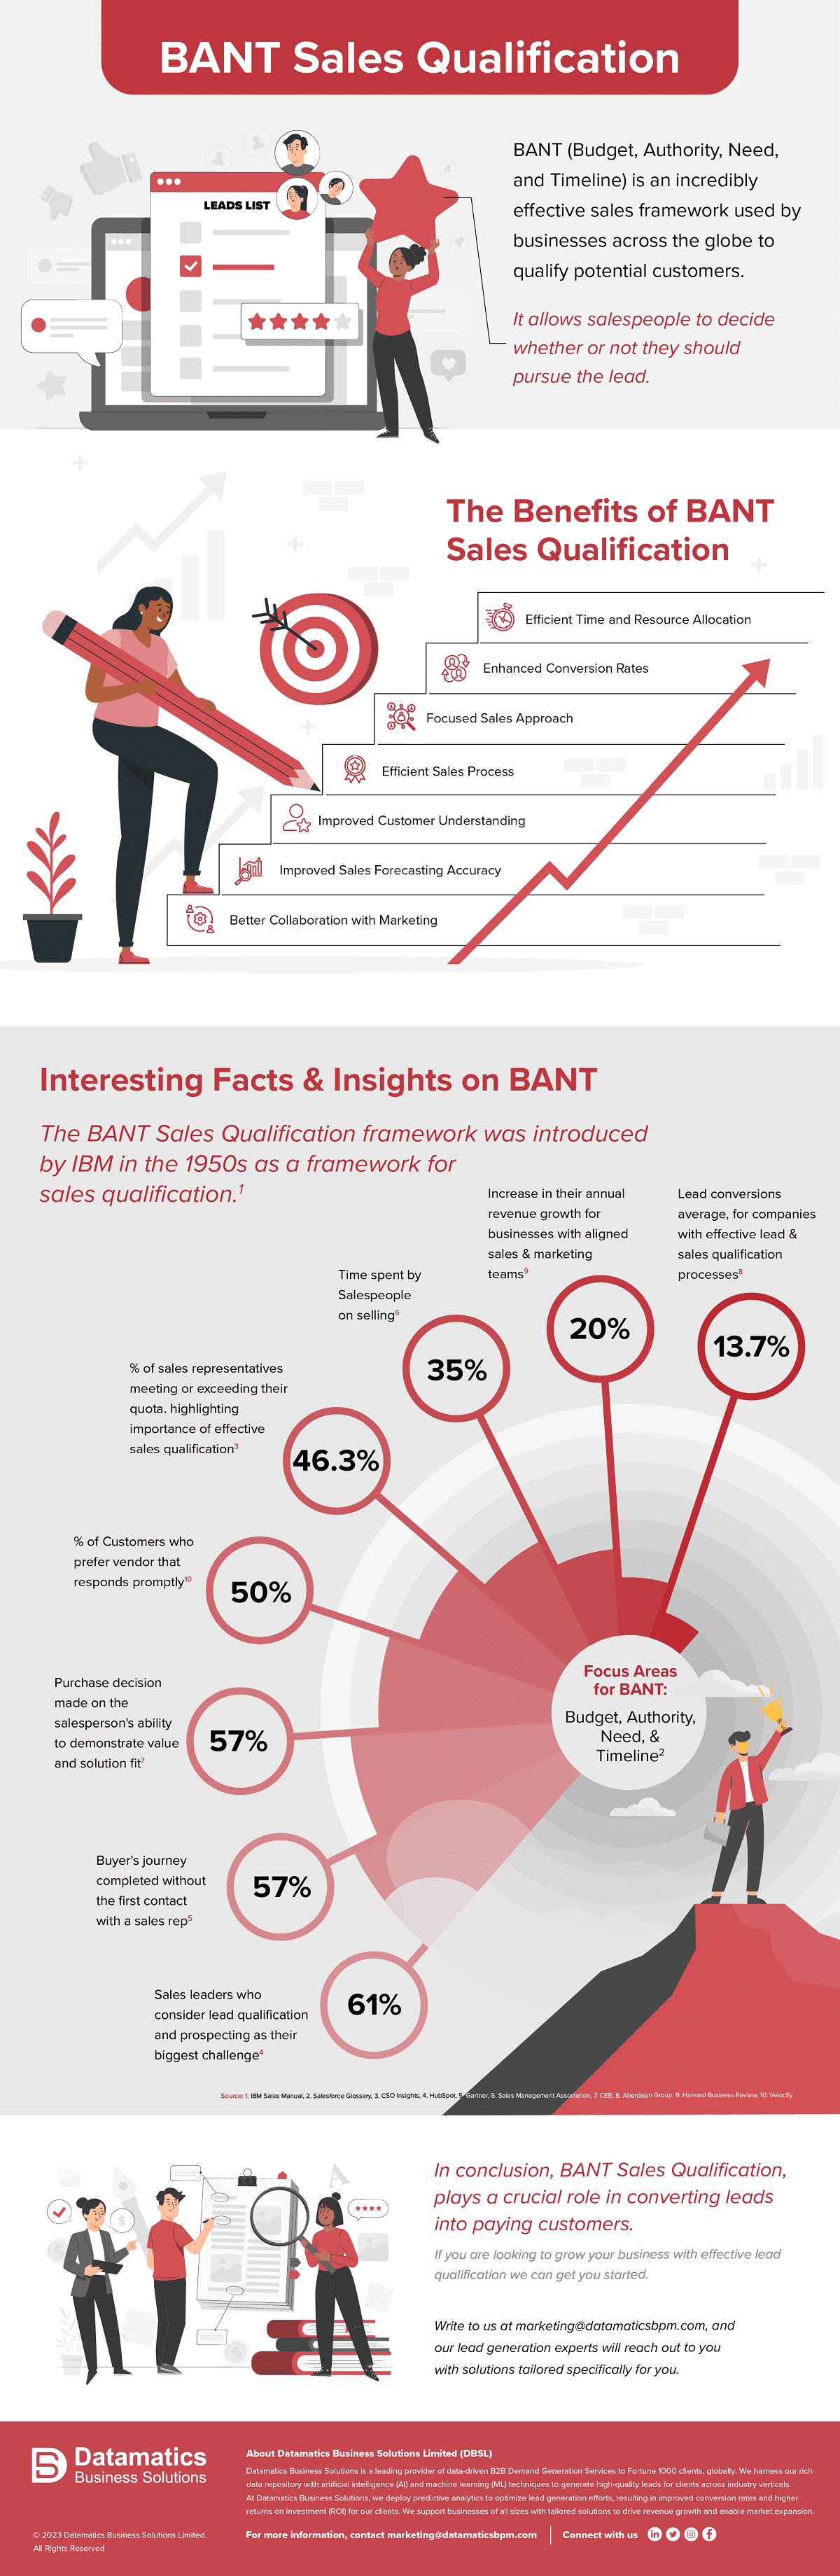 BANT Sales Qualification Interesting Facts & Insights - Infographic